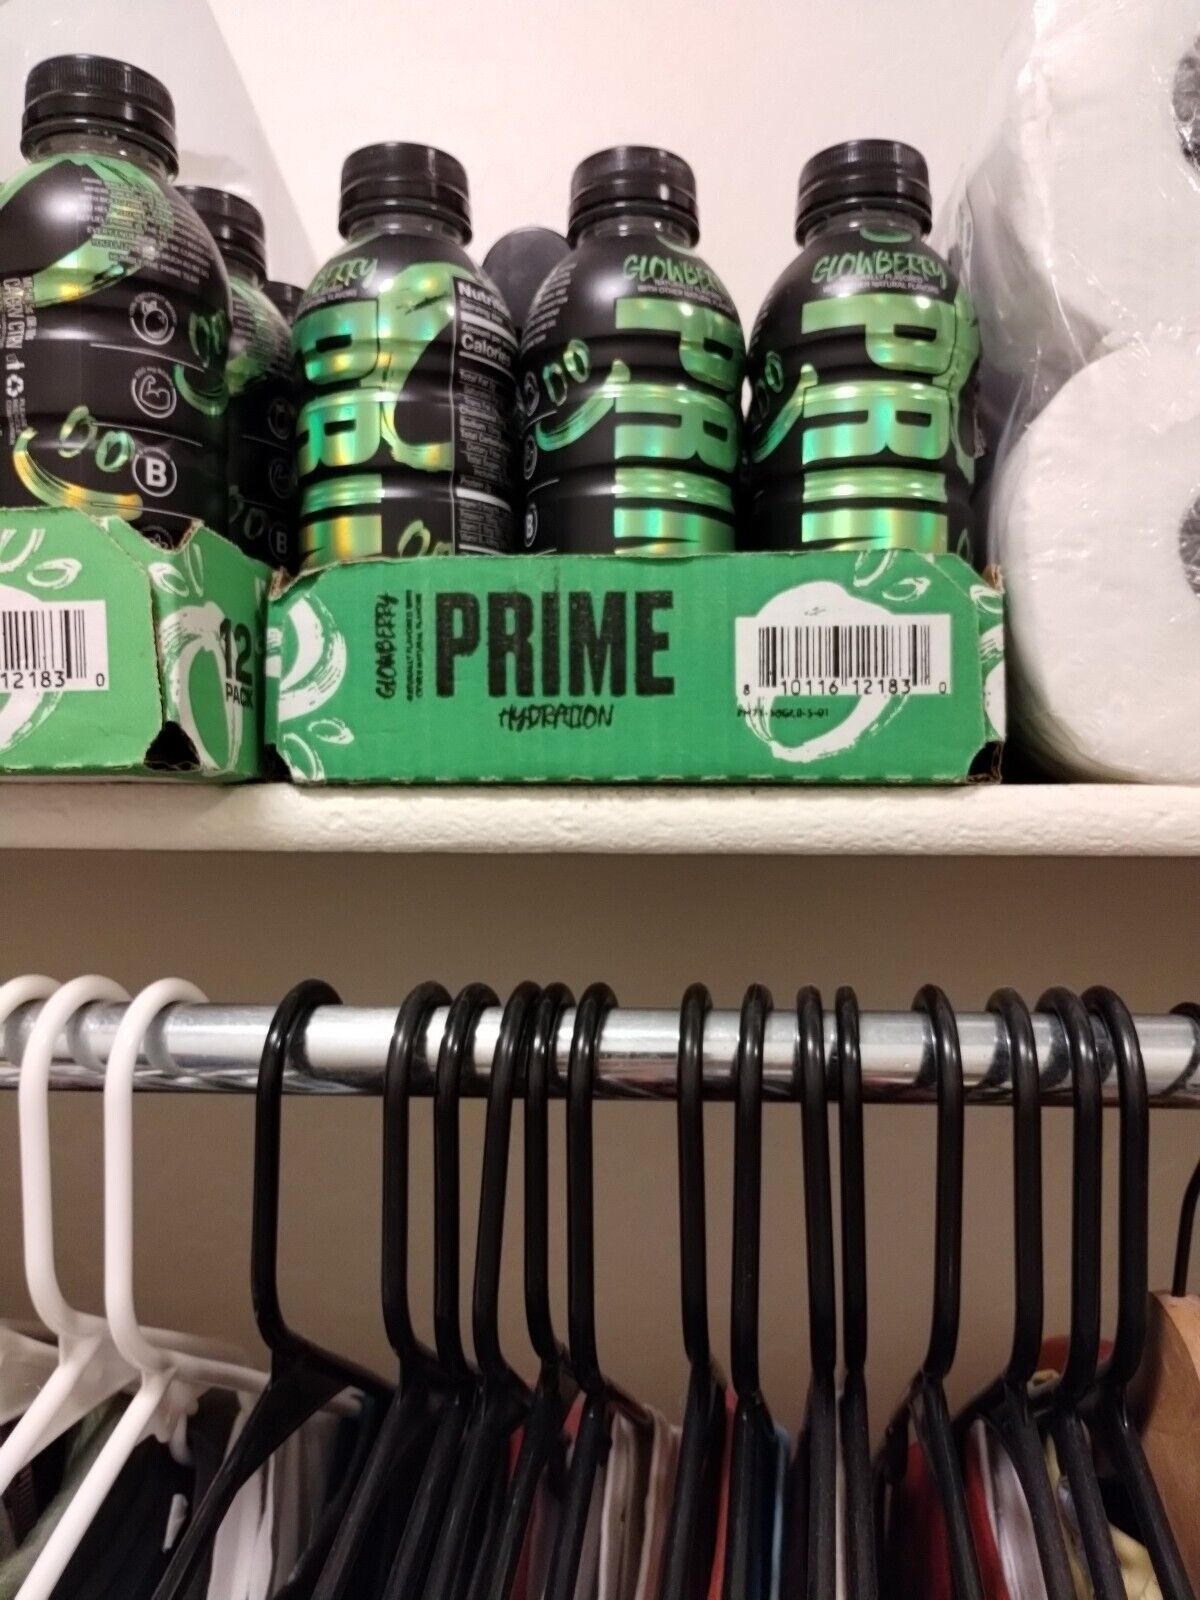 ULTRA RARE GLOWBERRY PRIME HYDRATION (12 Pack) (Unopened) Ships Next Day